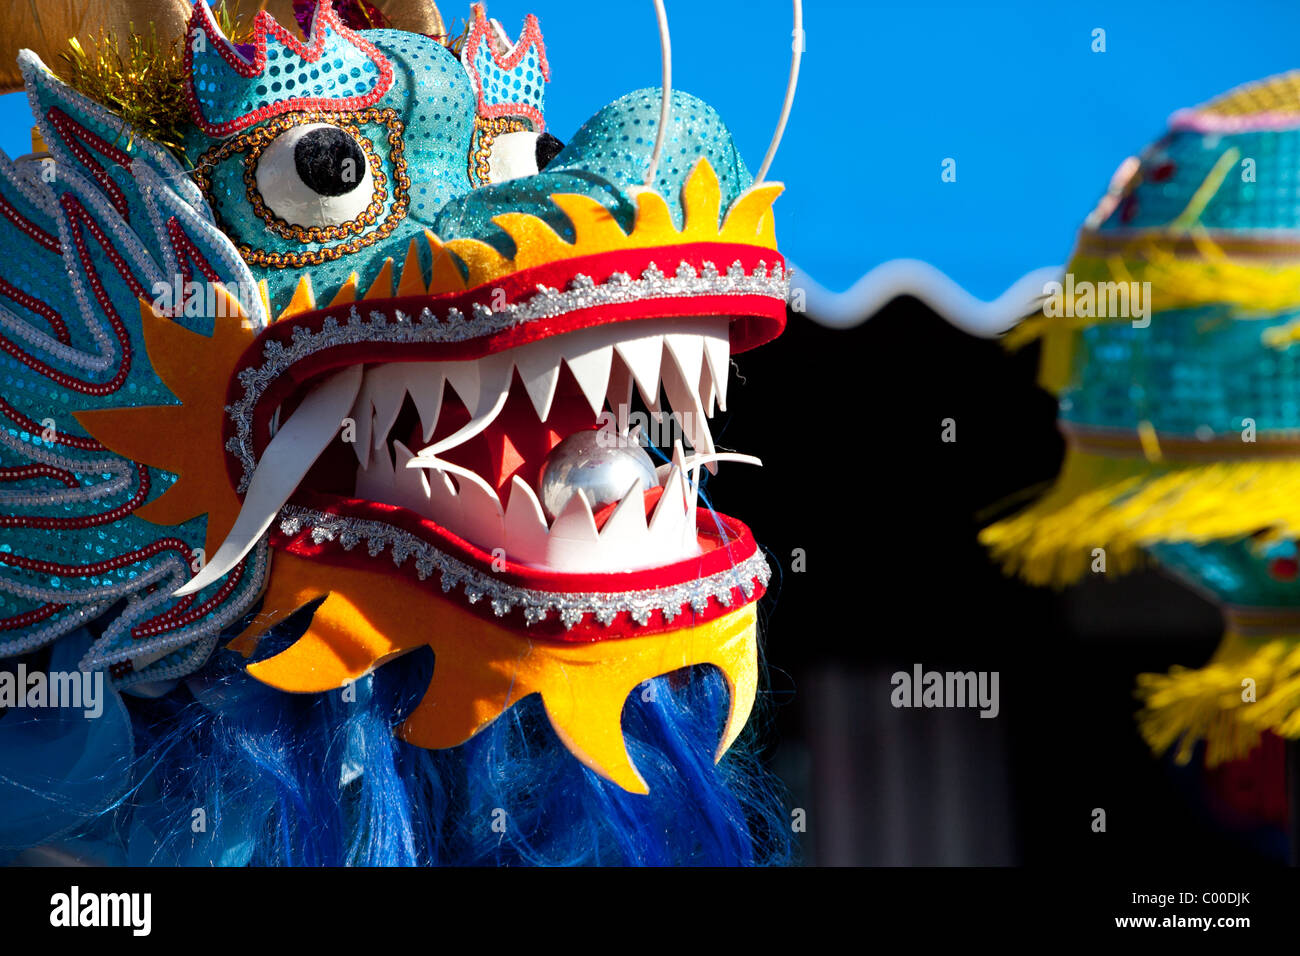 A Blue Chinese Dragon At A Chinese Lunar New Year Celebration Stock Photo Alamy